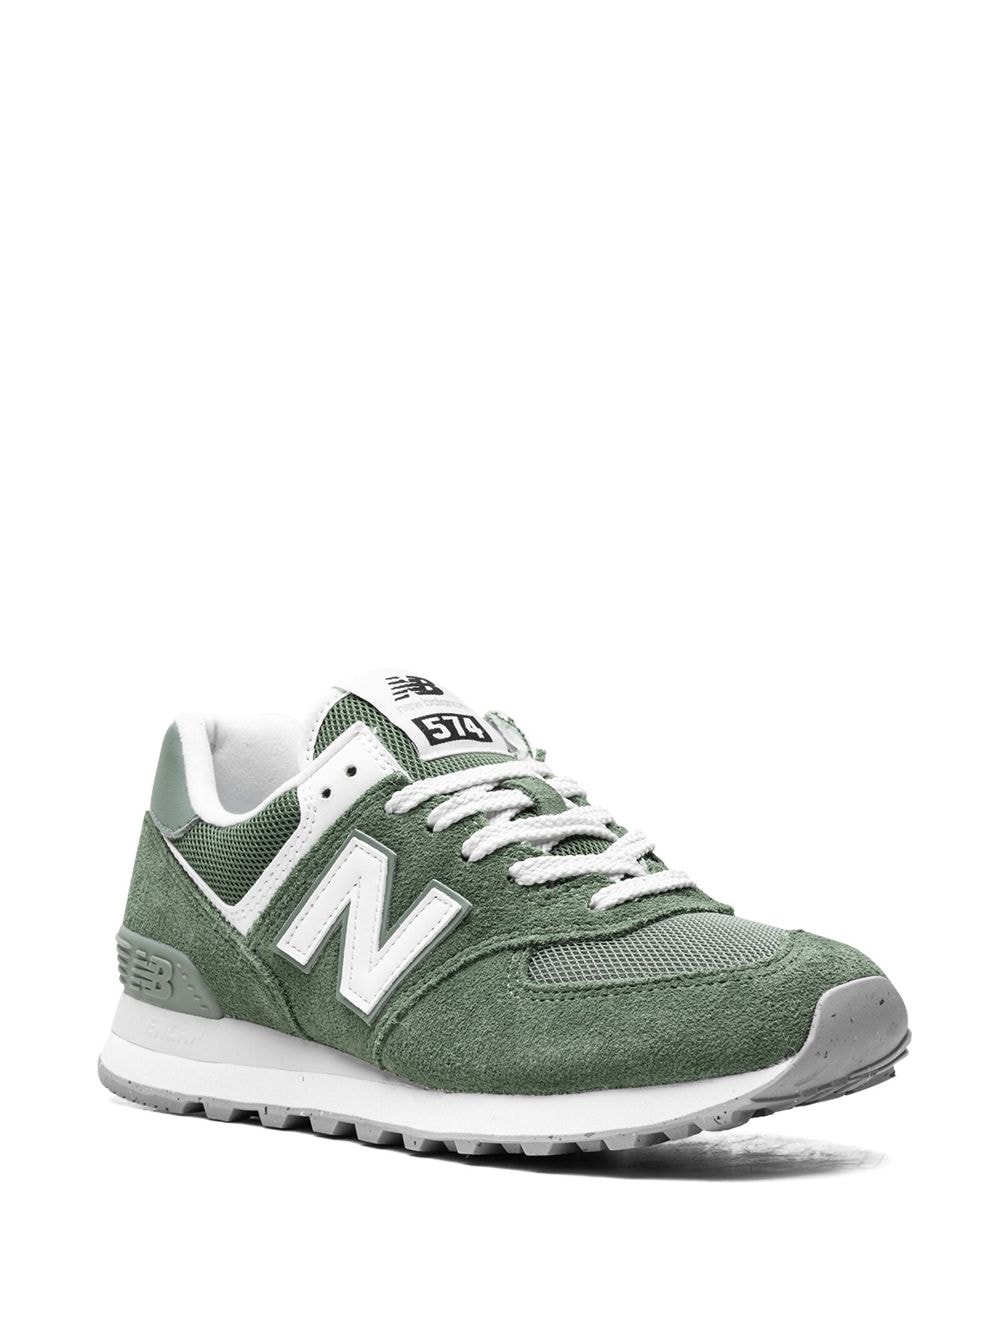 Image 2 of New Balance 574 "Green Fog" sneakers